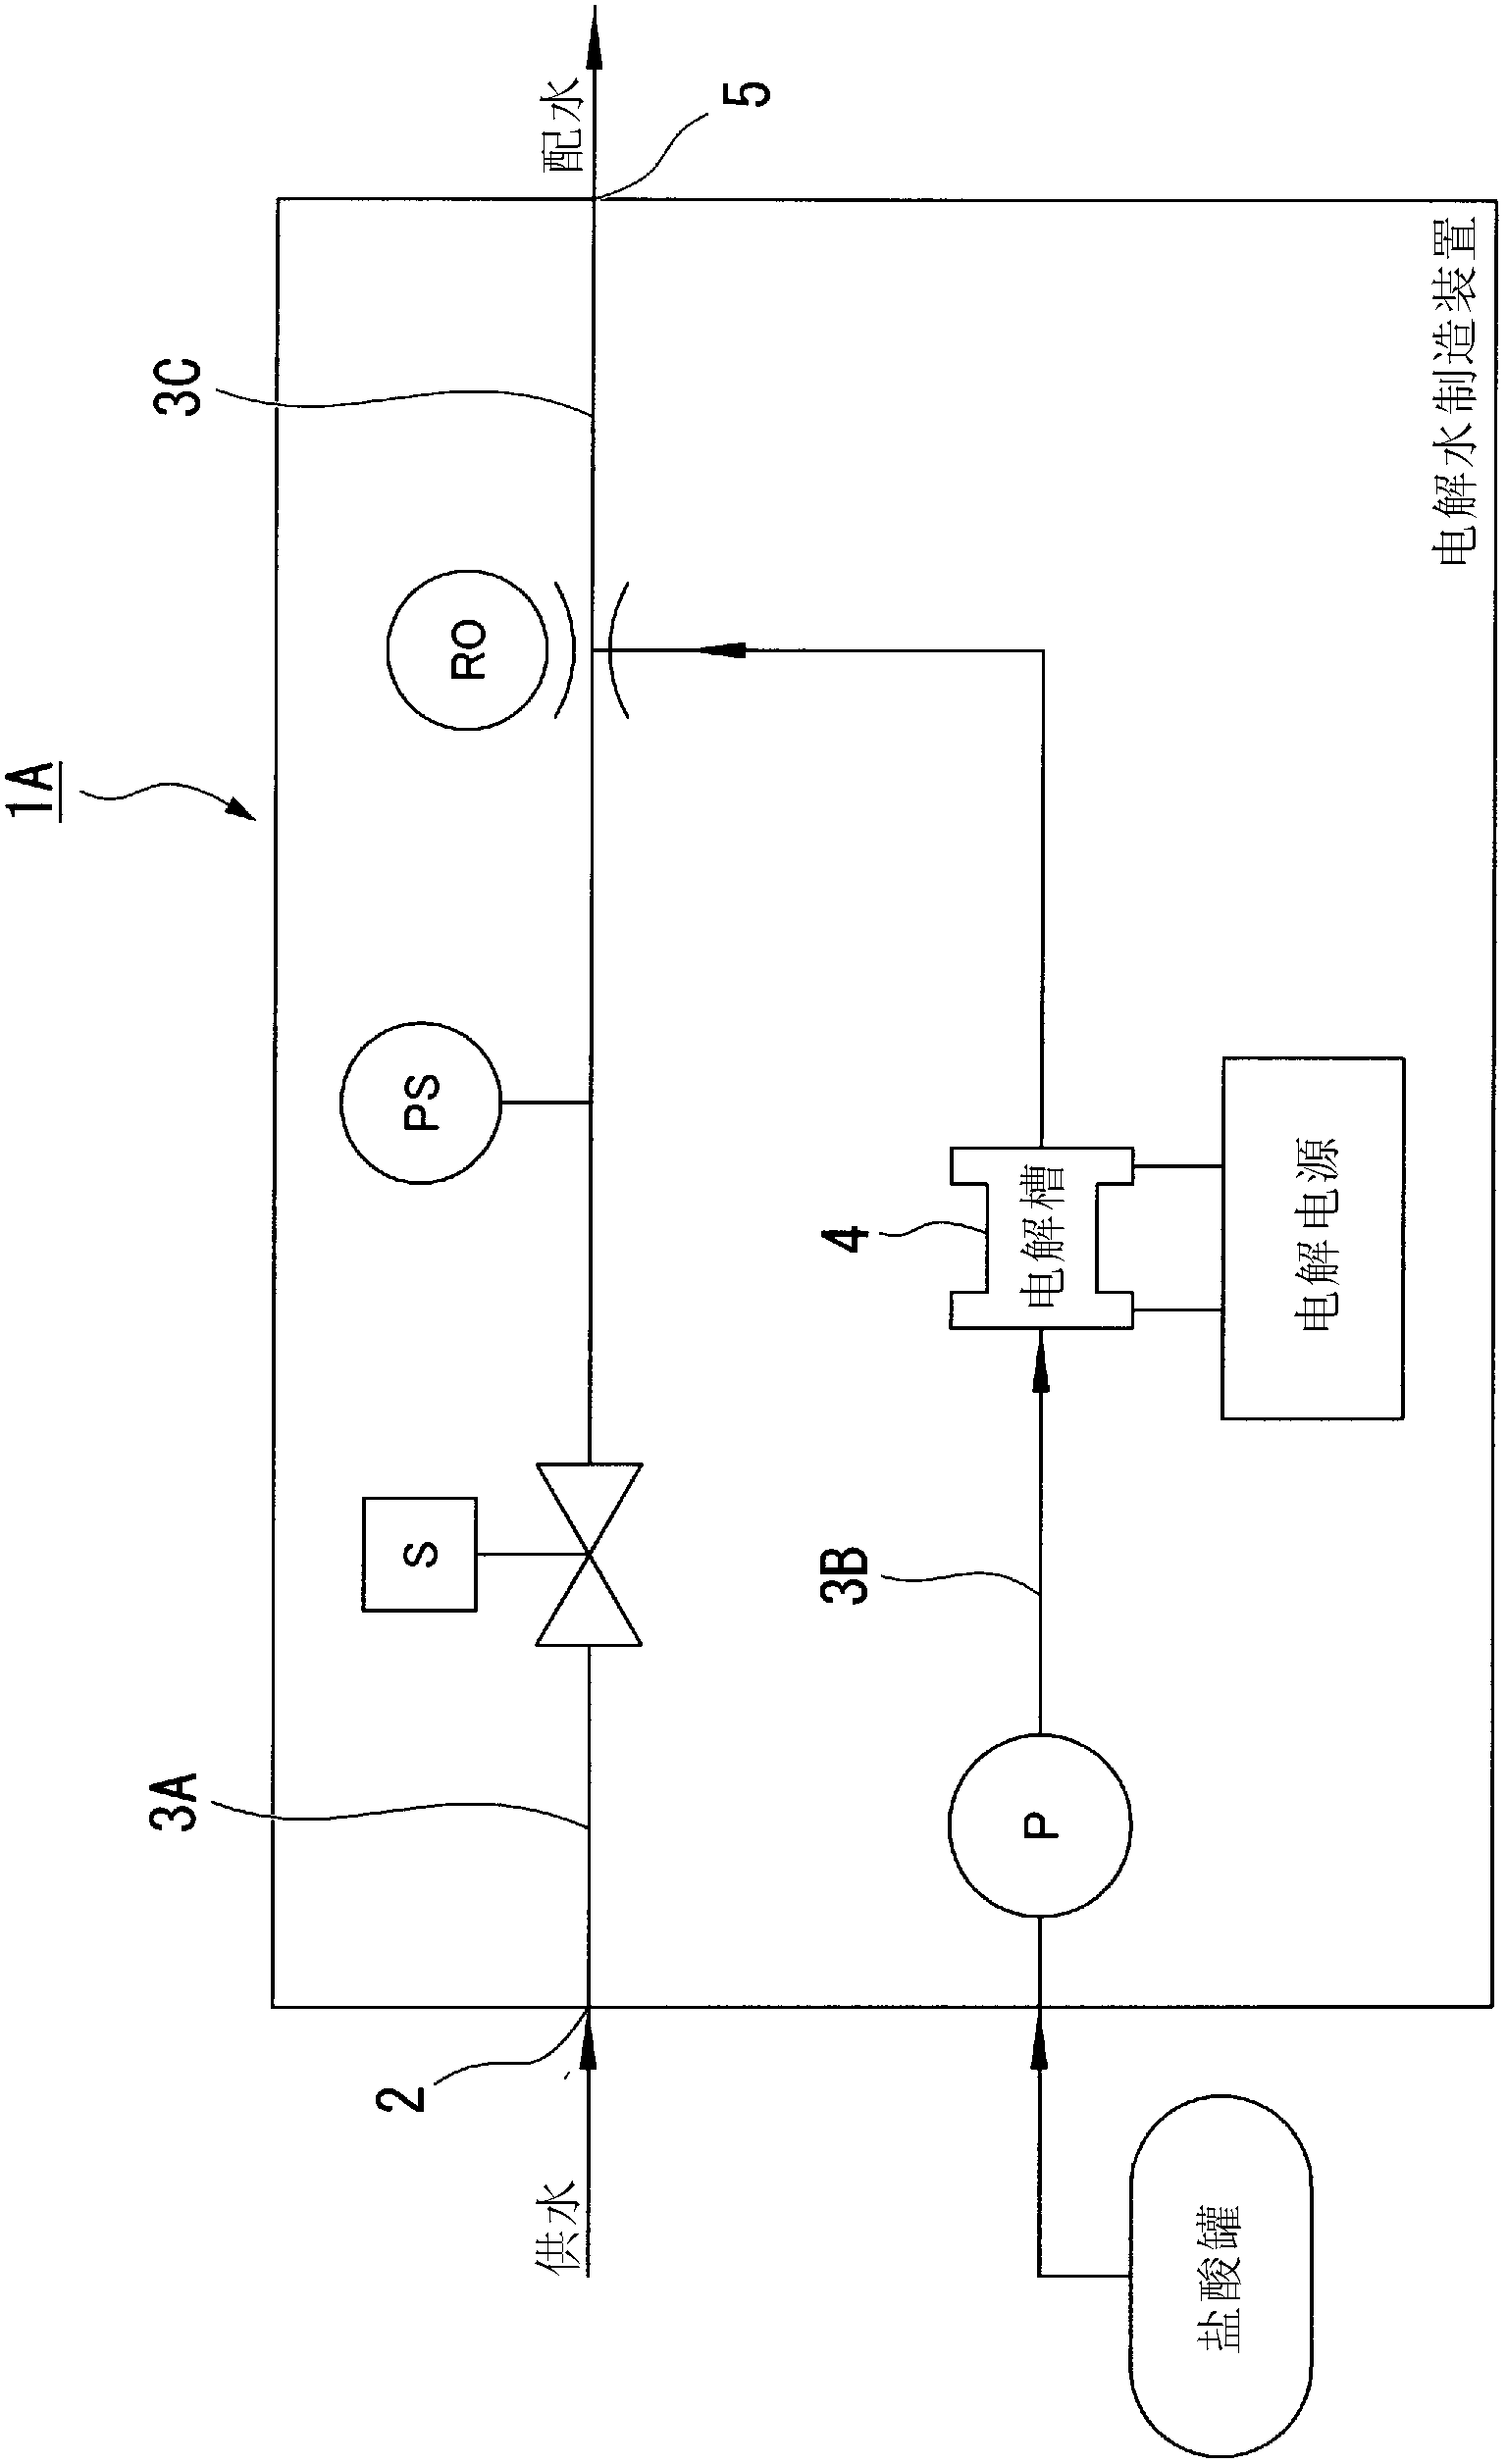 Electrolyzed water production apparatus